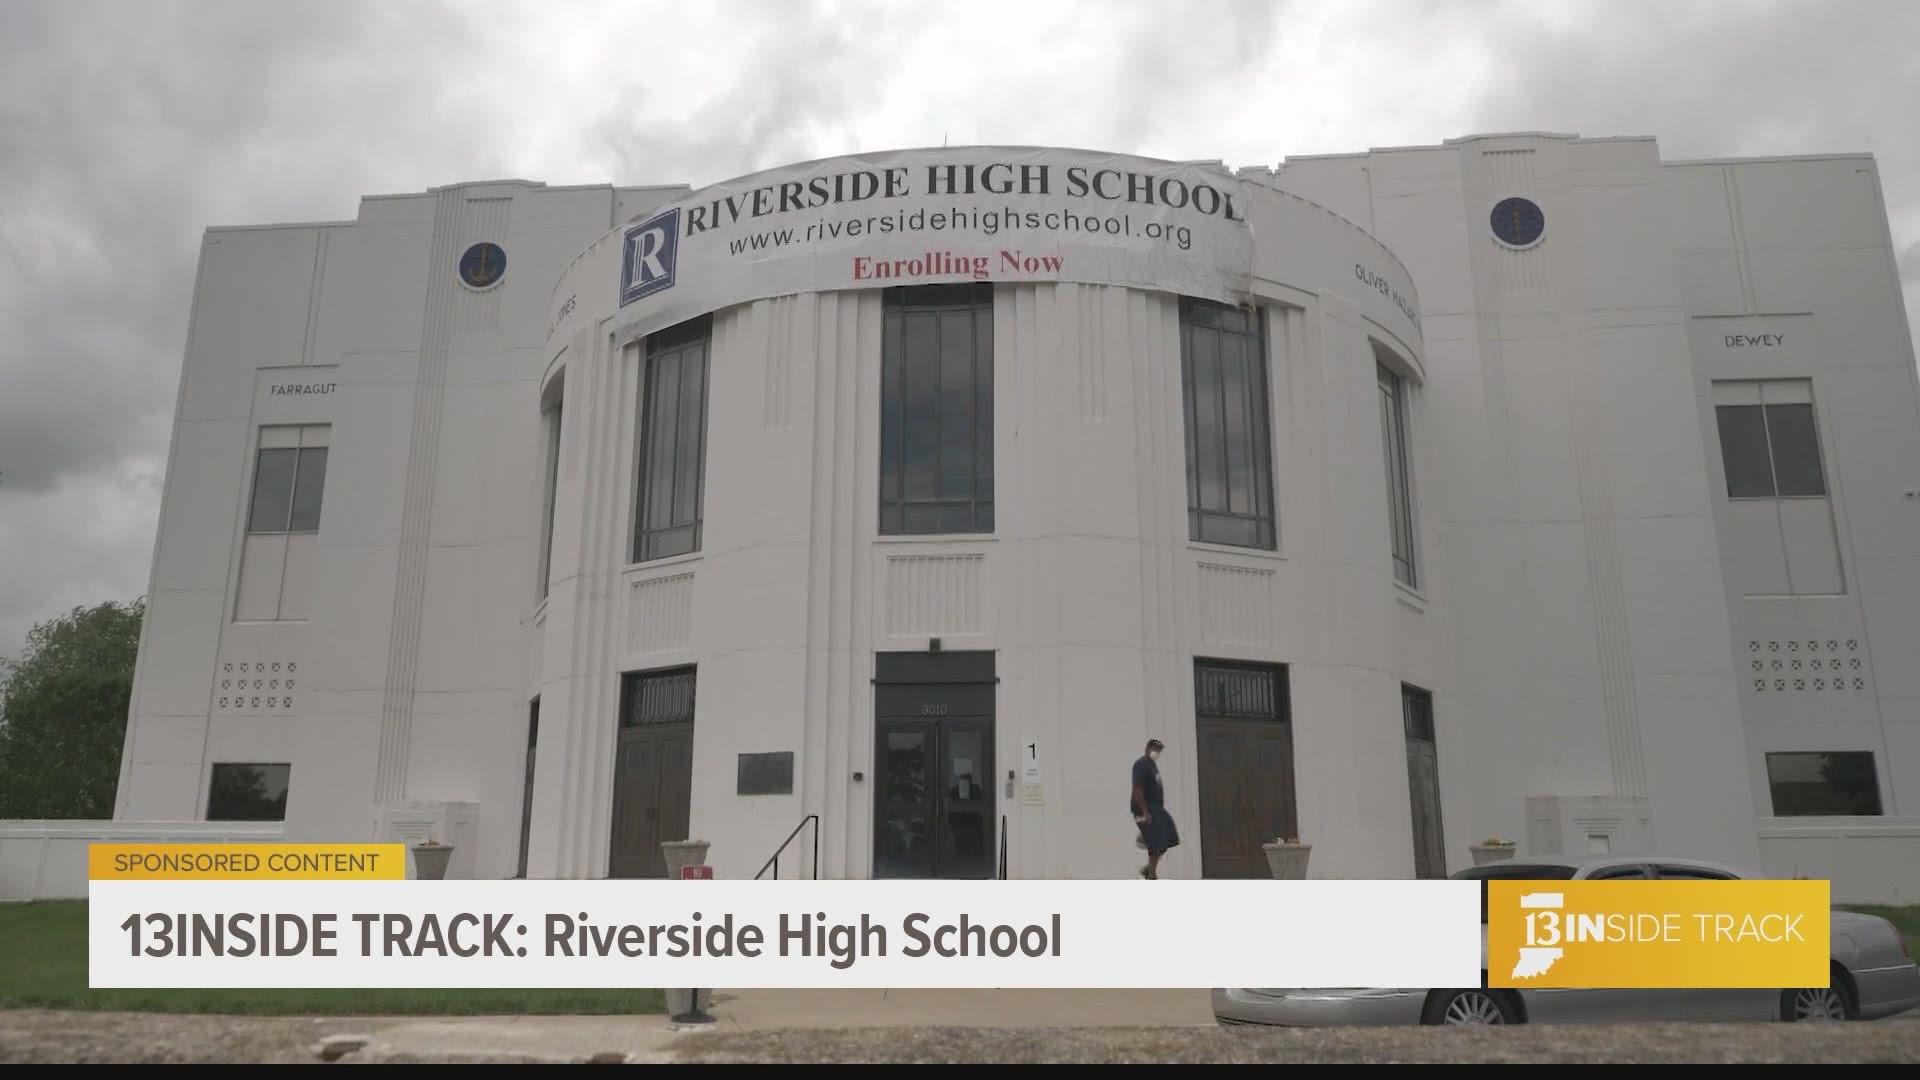 Riverside High School prepares students for college with an extra focus on liberal arts and sciences.